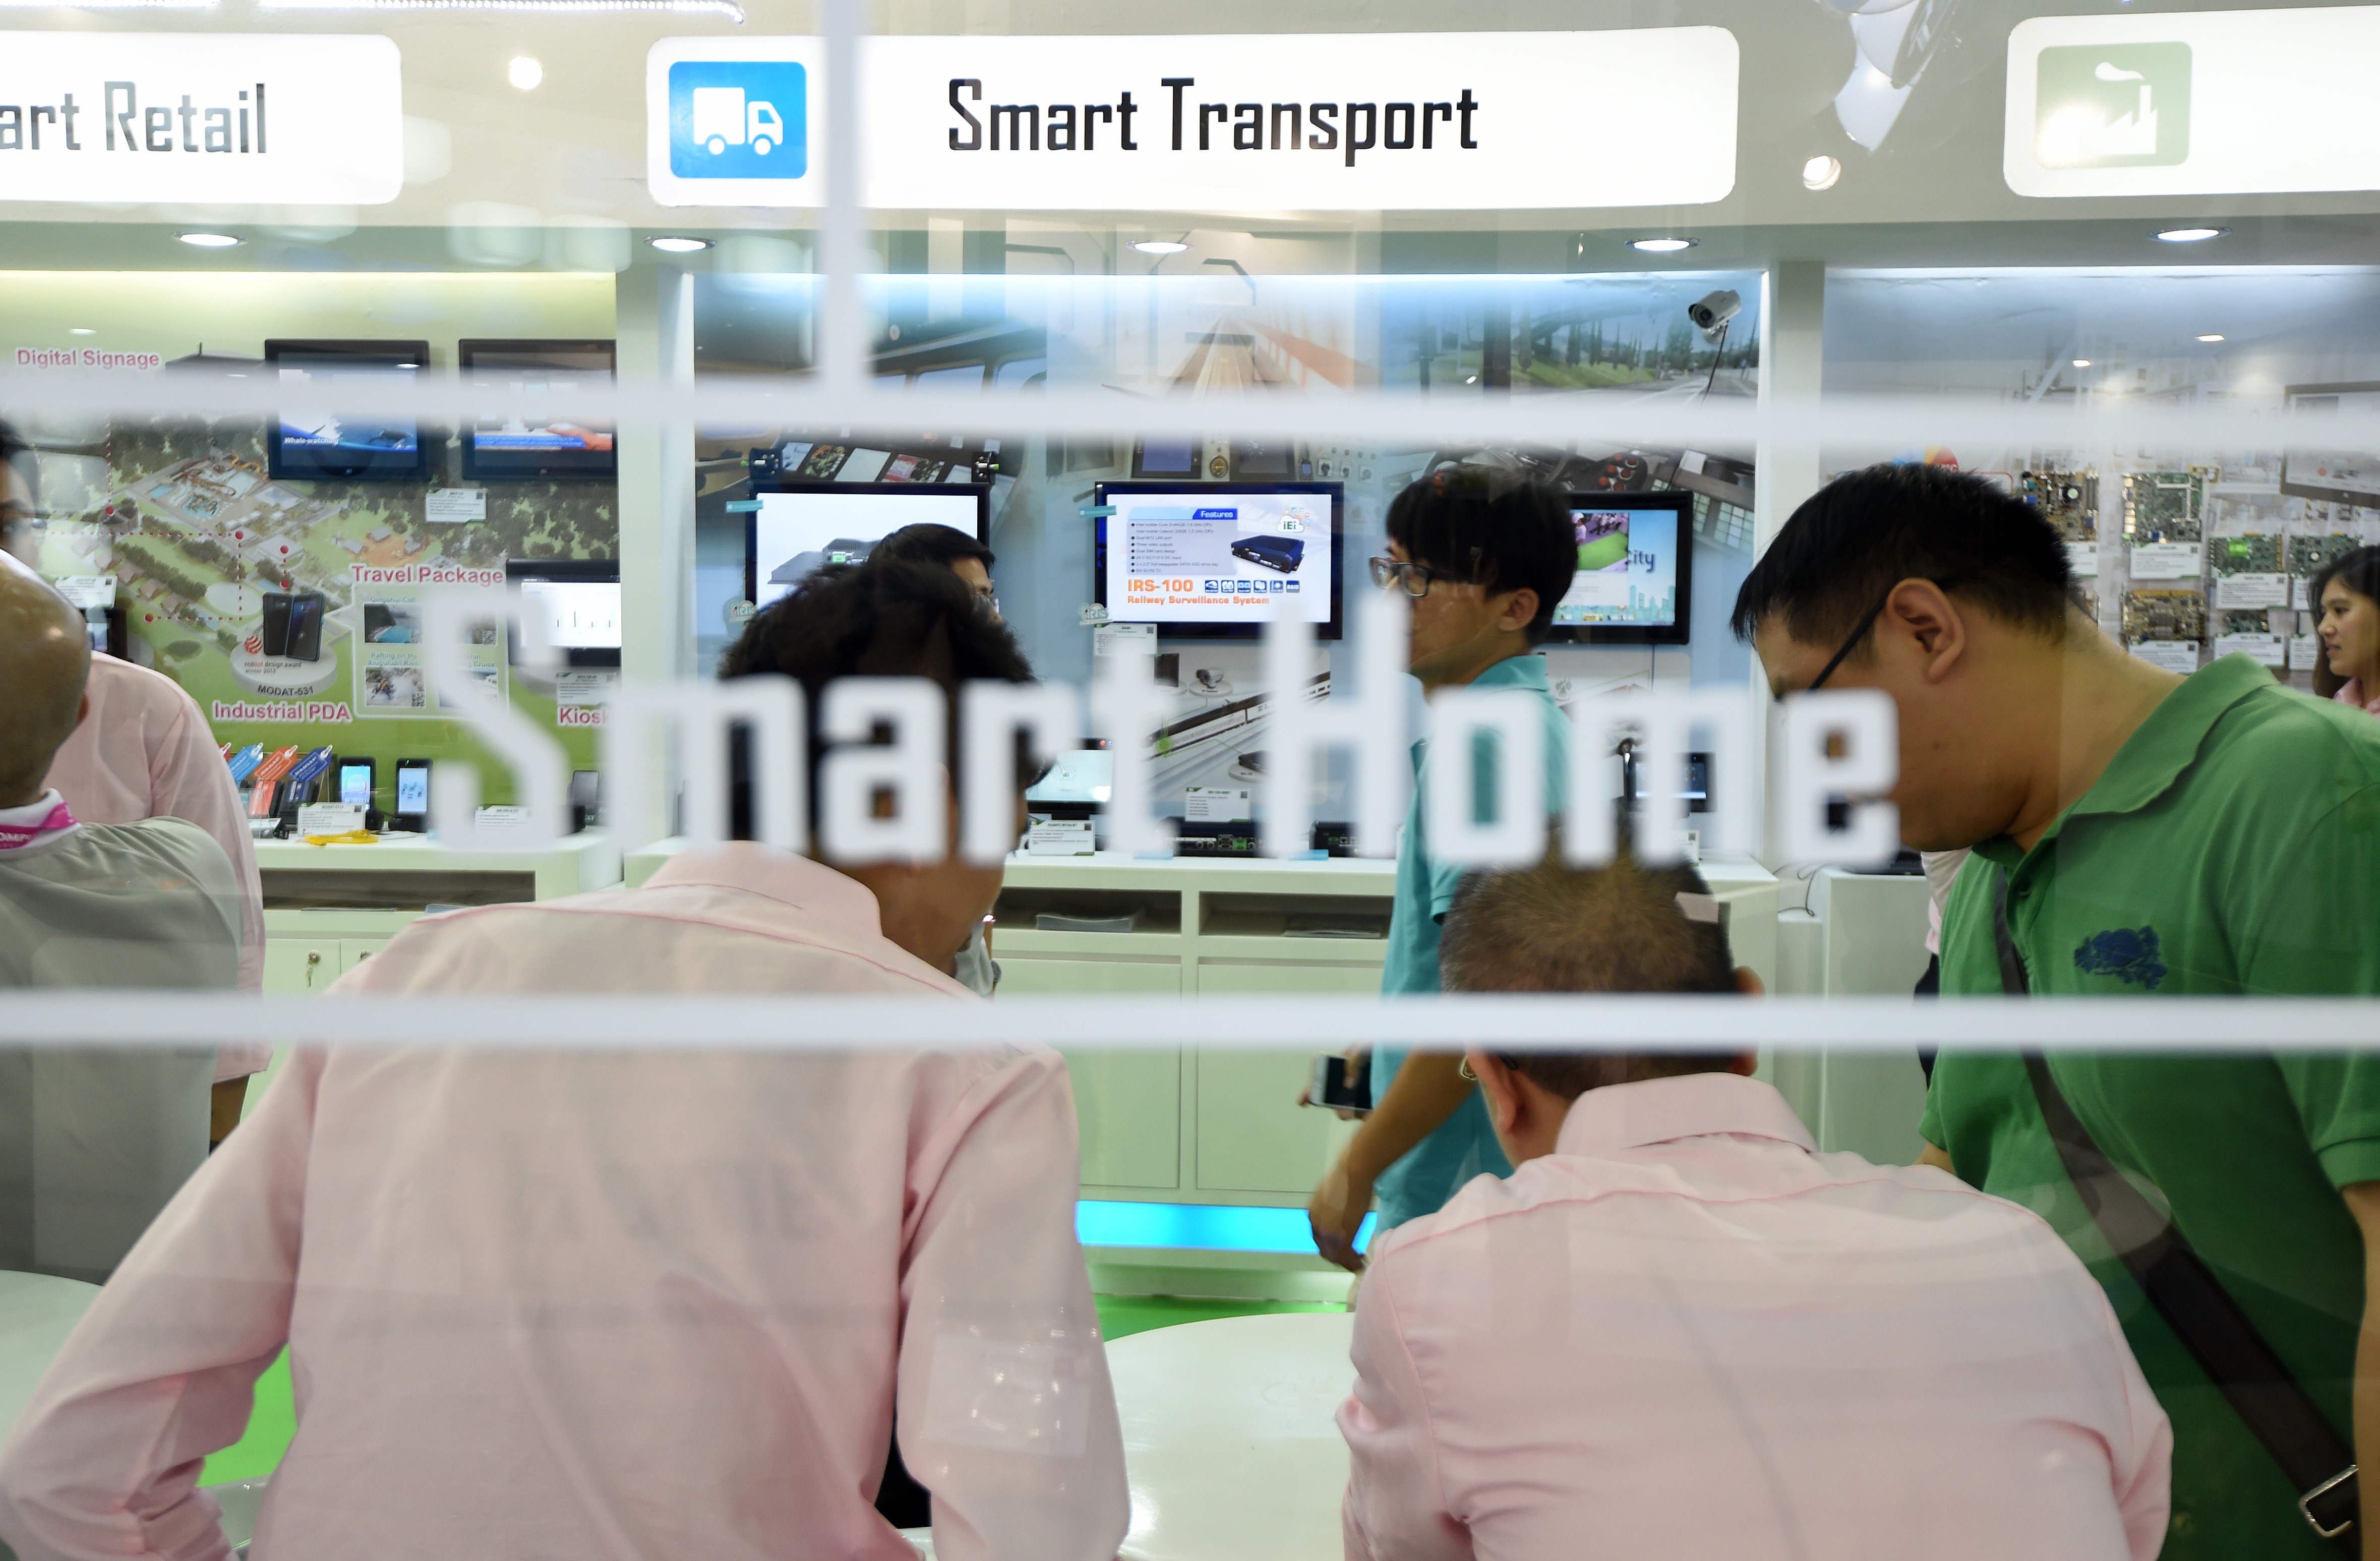 Visitors speak inside a smart home during the Computex trade show in Taipei on June 2, 2015.  More then 5,000 booths from 1,700 companies took part in the internet computer technology show between June 2 to 5.   AFP PHOTO / Sam Yeh / AFP PHOTO / SAM YEH